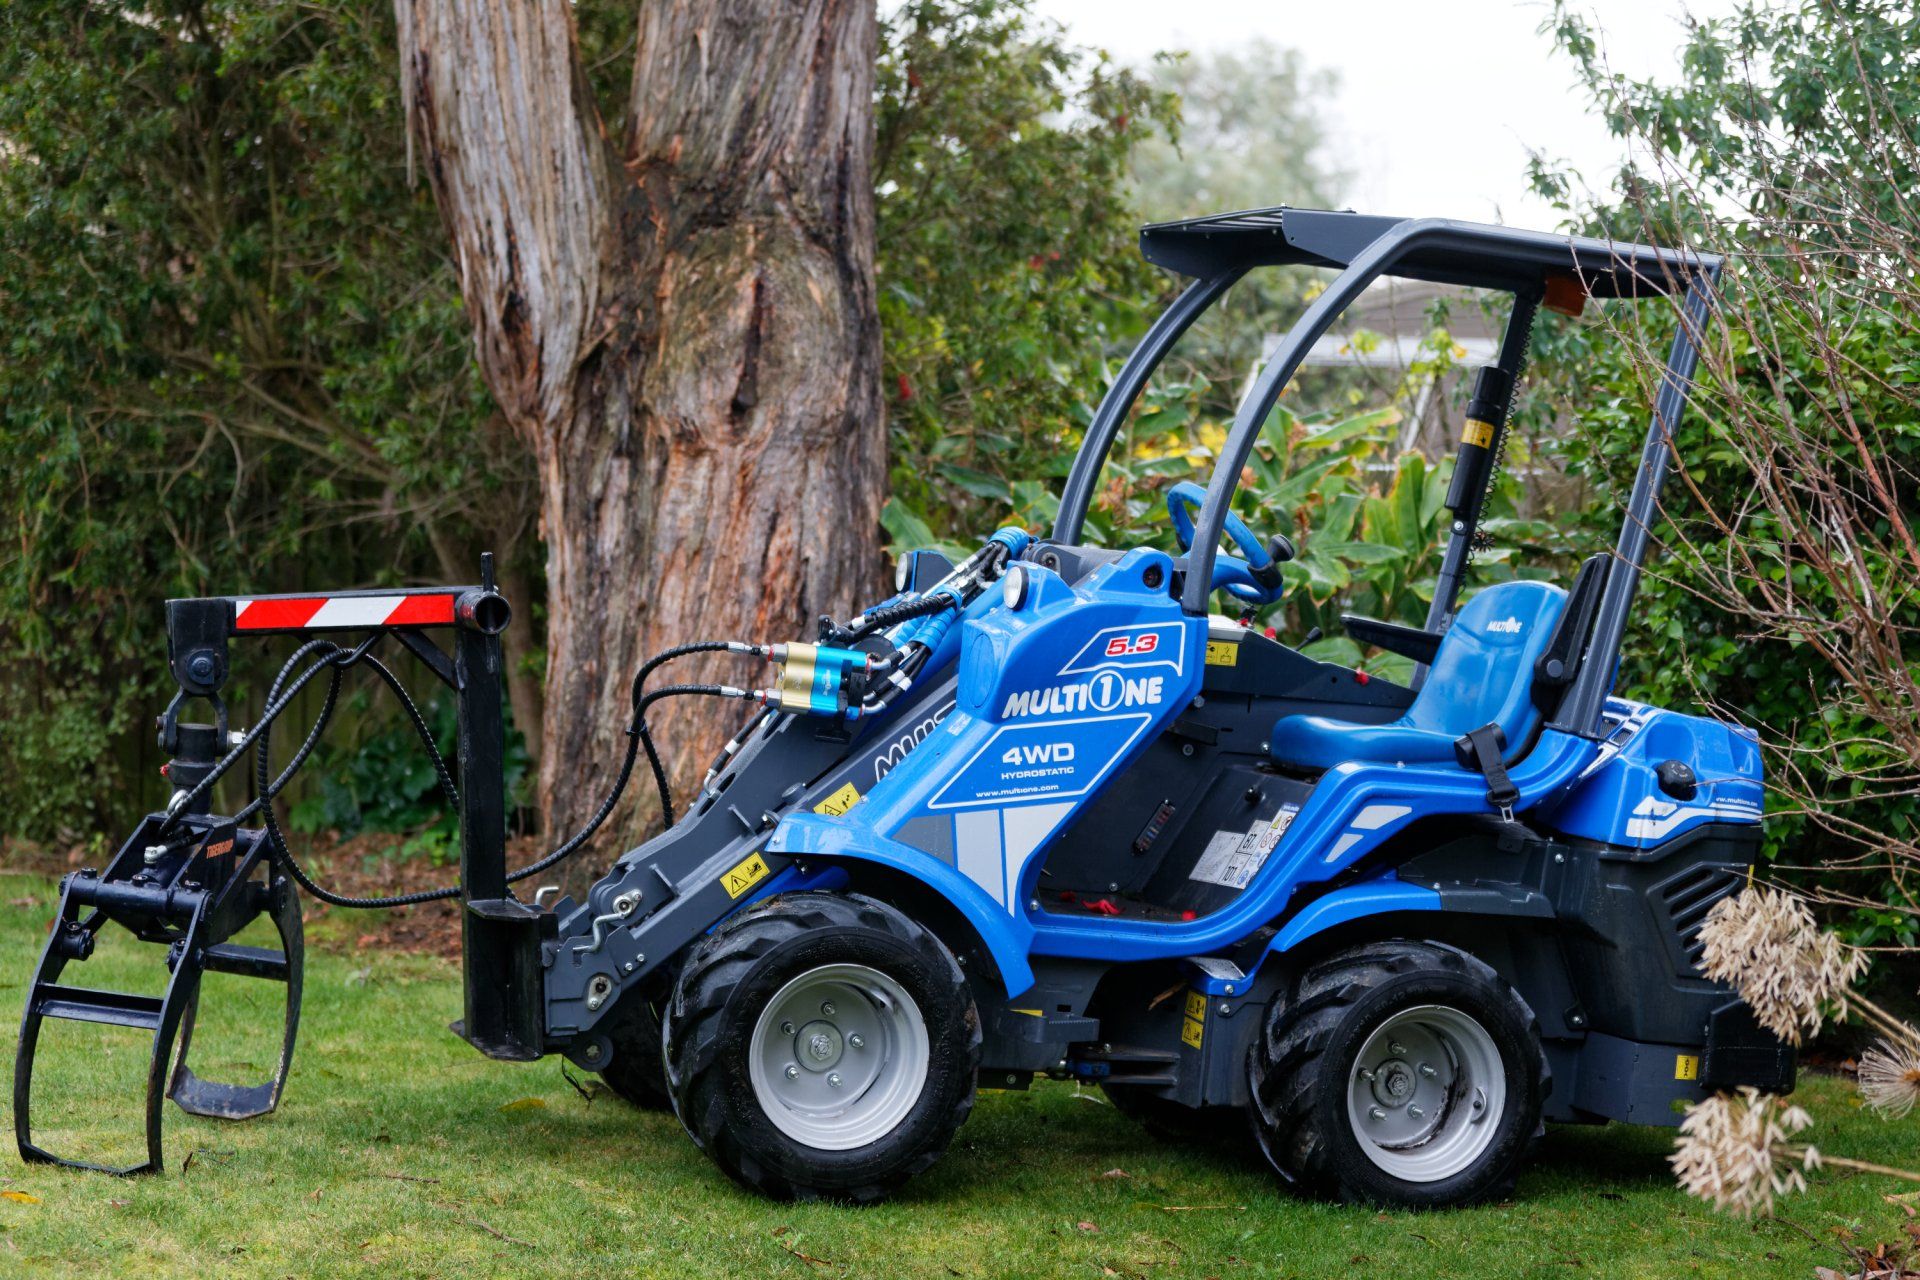 Arborist,tree,chainsaw,tree removal,stump grinding,tree care,pruning,hedge trimming,trimmer tree,tree lopper,wood chipping,mulch,tree surgeon,garden care,site clearance,fully insured arborist service,Inverloch,Wonthaggi,Korumburra